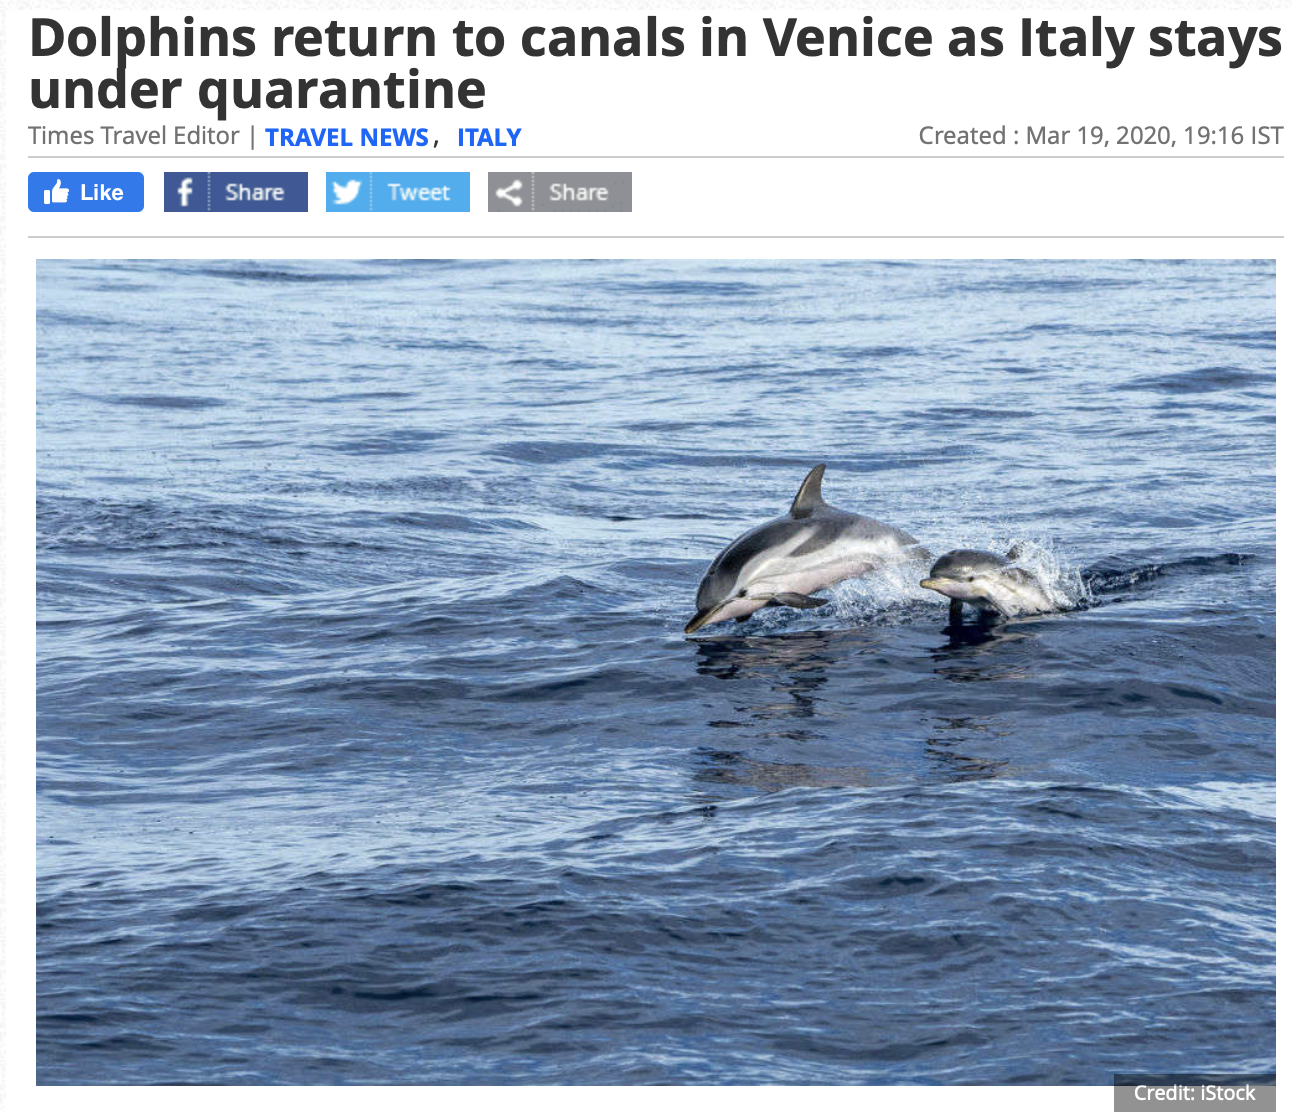 Dolphins in Venice